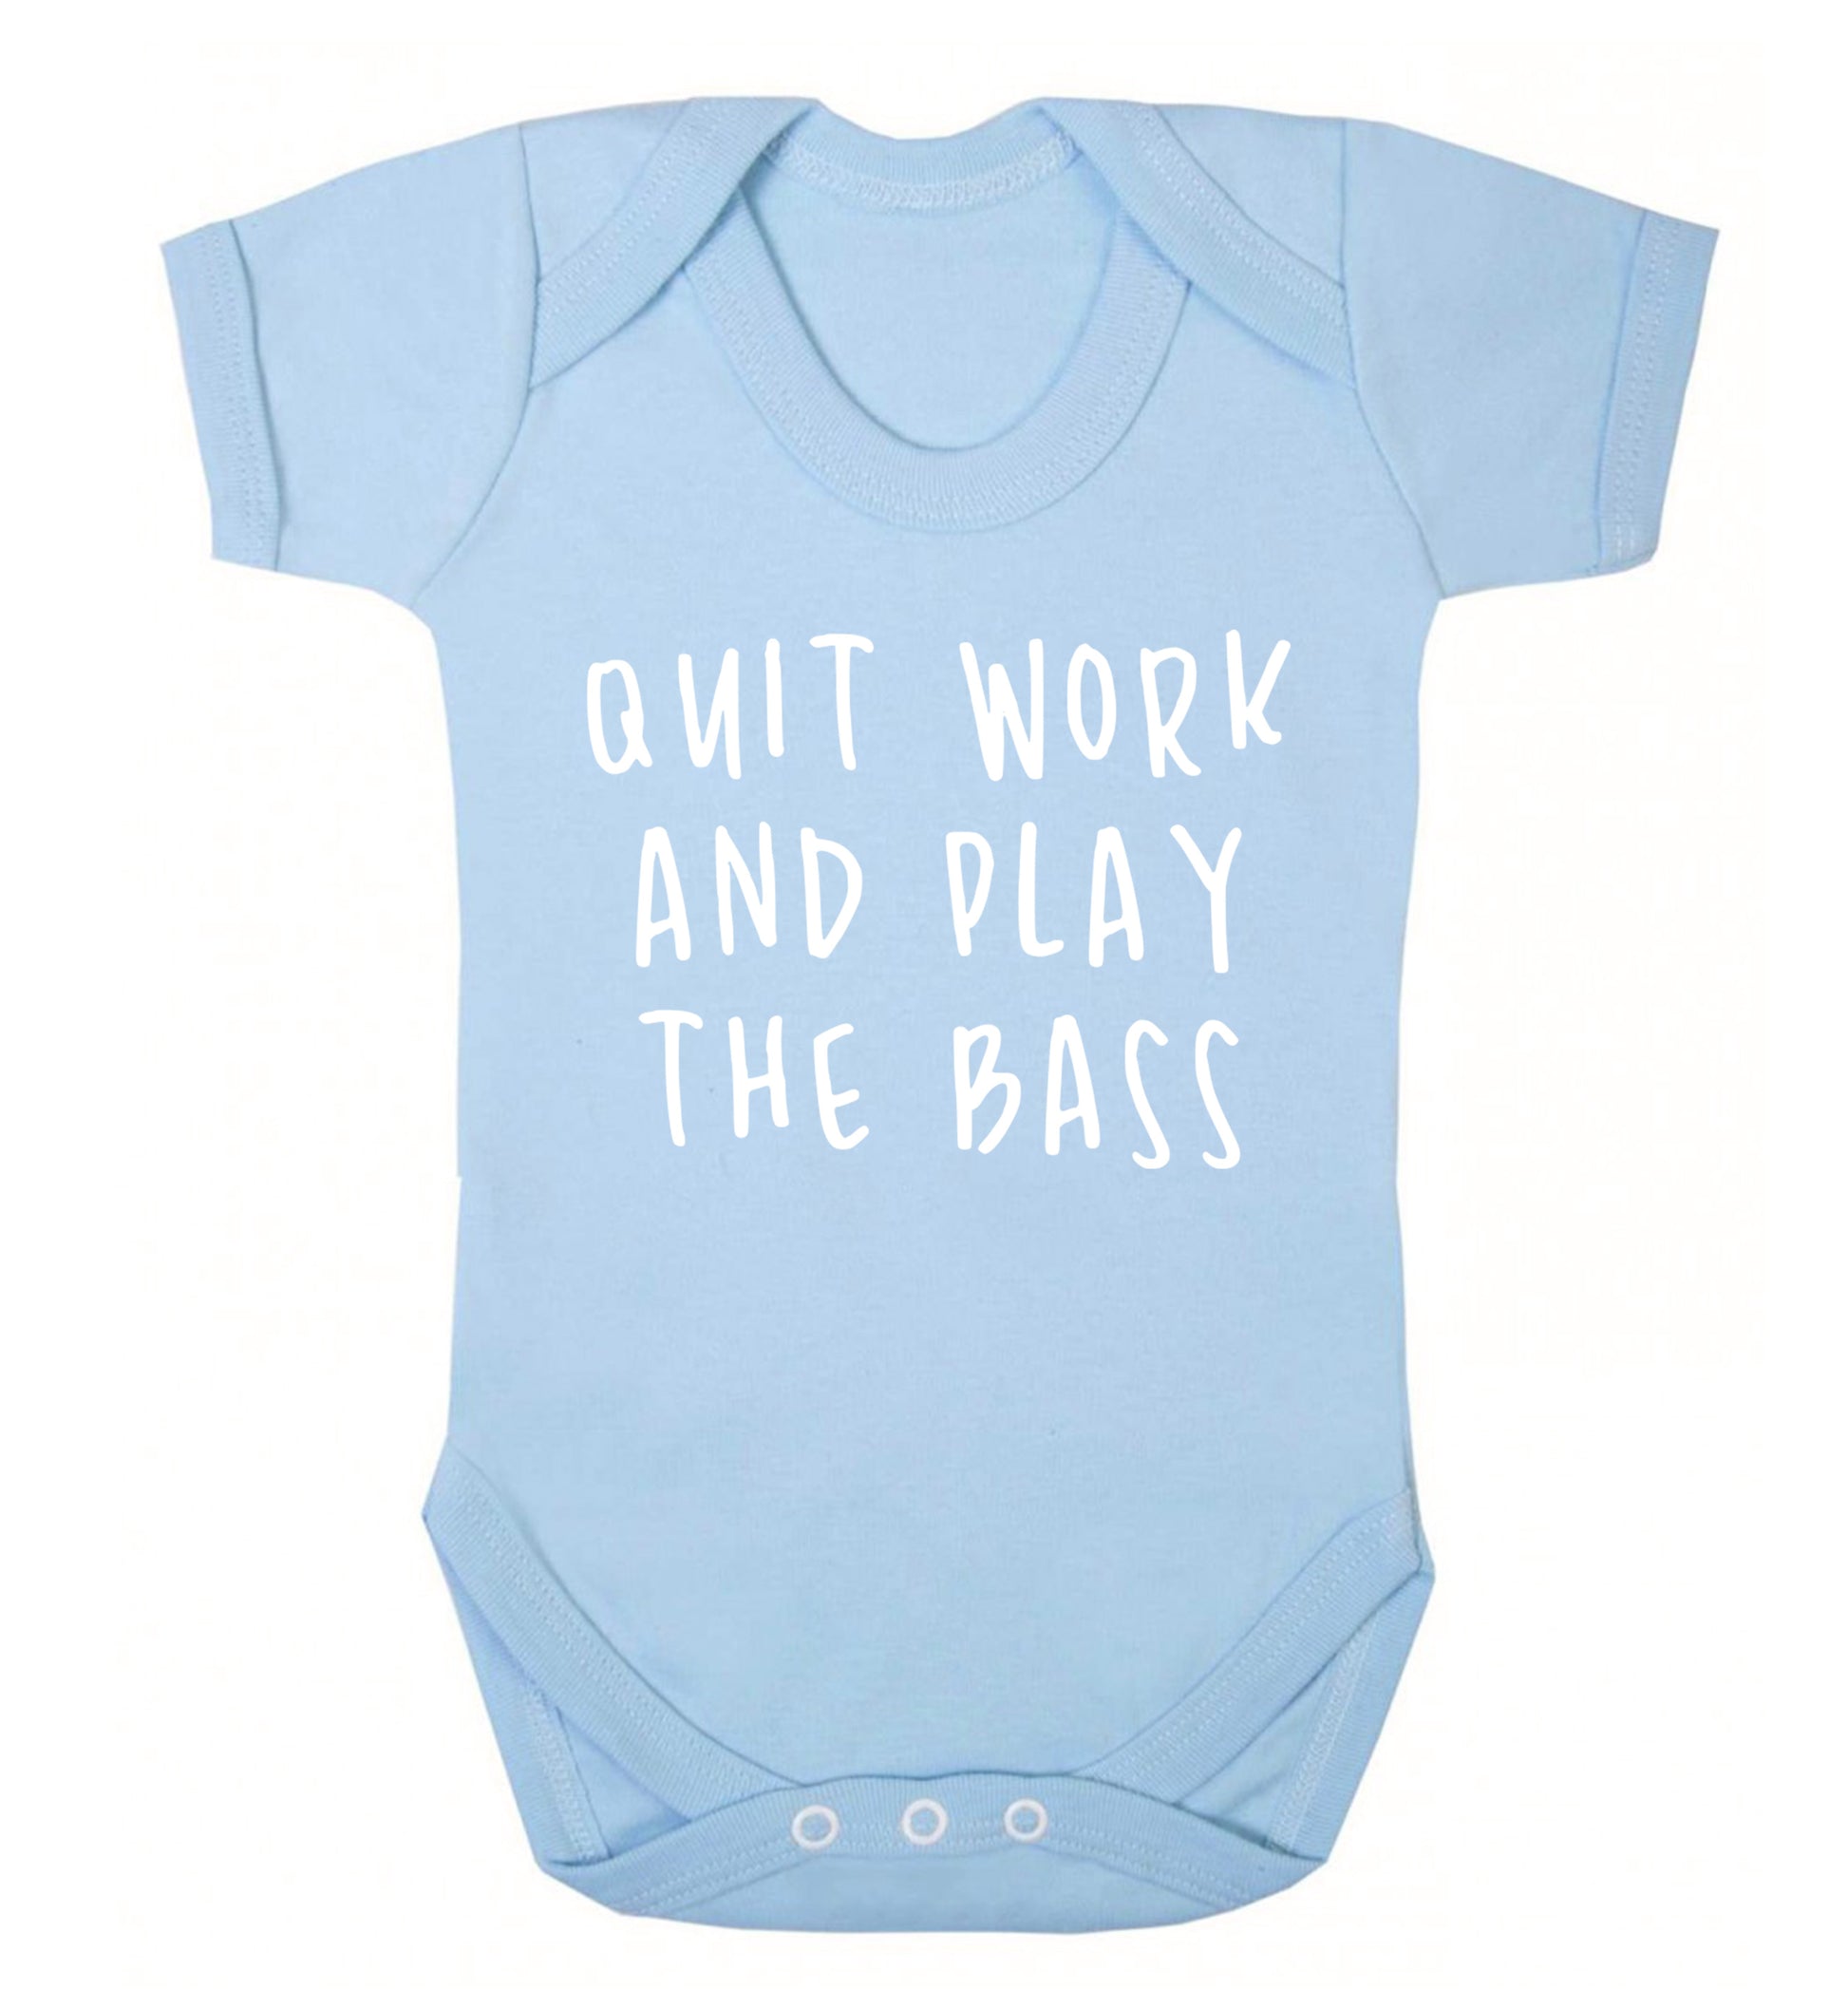 Quit work and play the bass Baby Vest pale blue 18-24 months